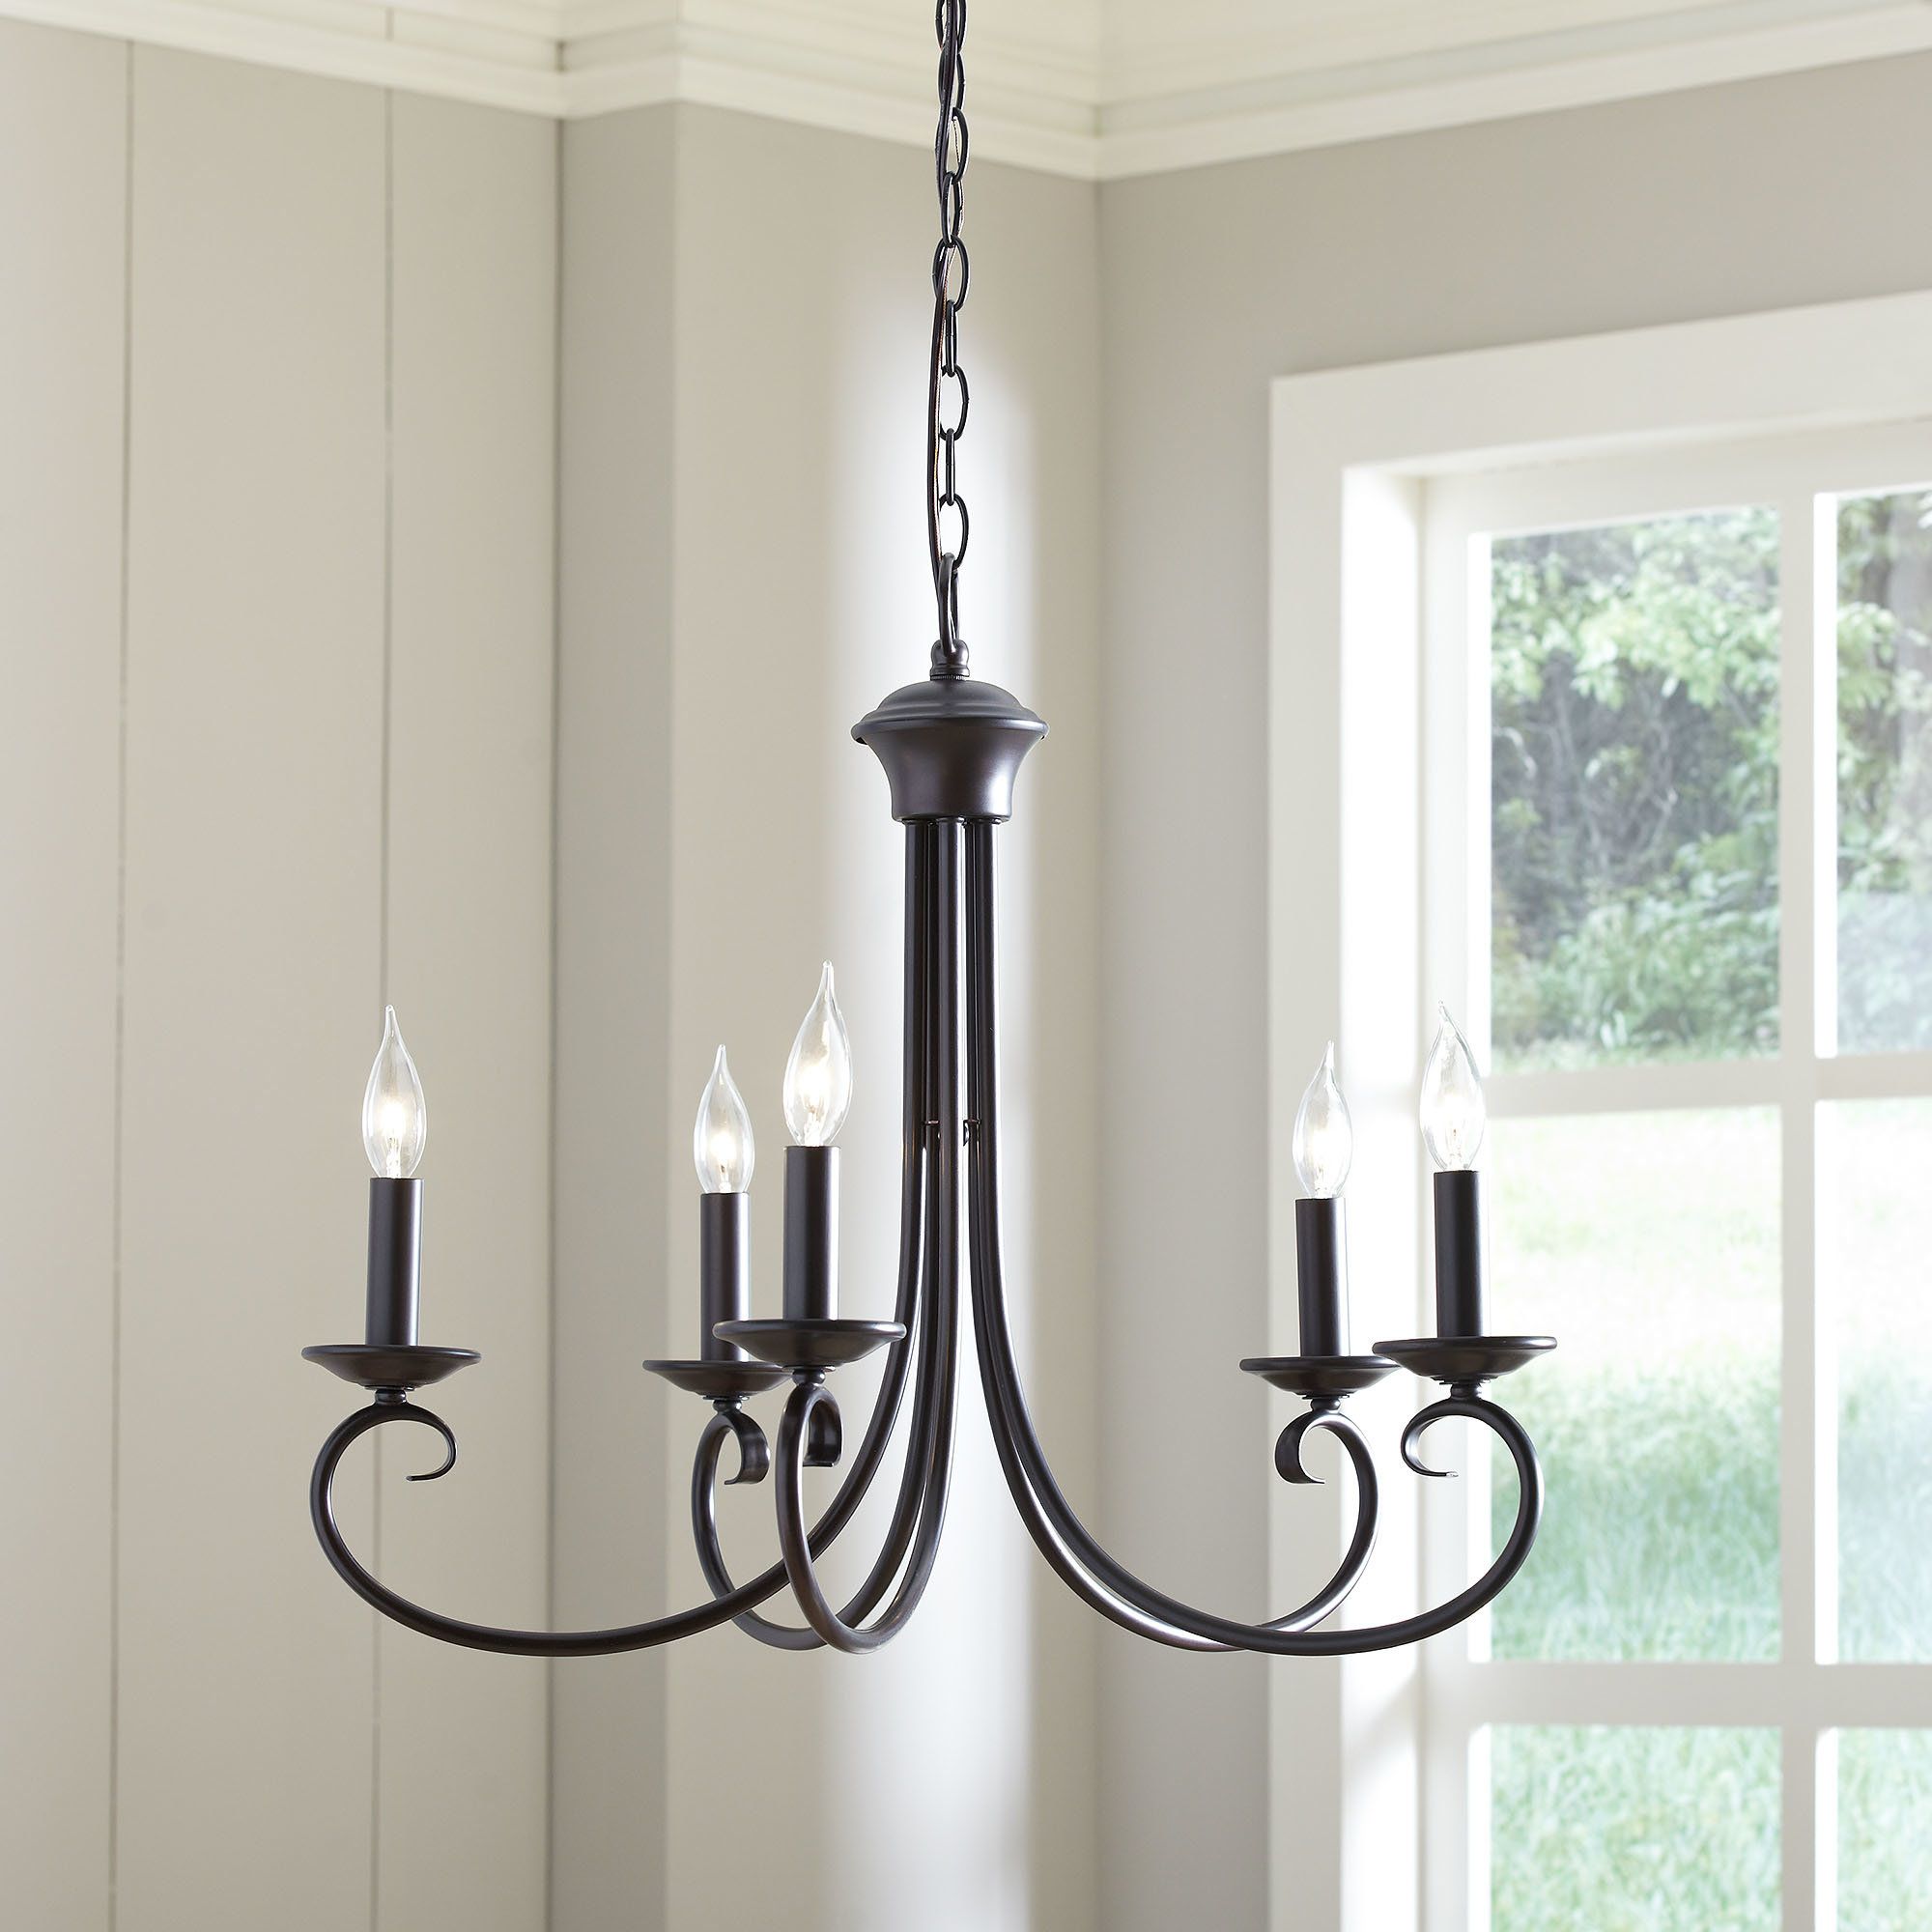 Warner Robins 3 Light Lantern Pendants With Regard To Most Up To Date Edgell 5 Light Candle Style Chandelier (View 11 of 25)